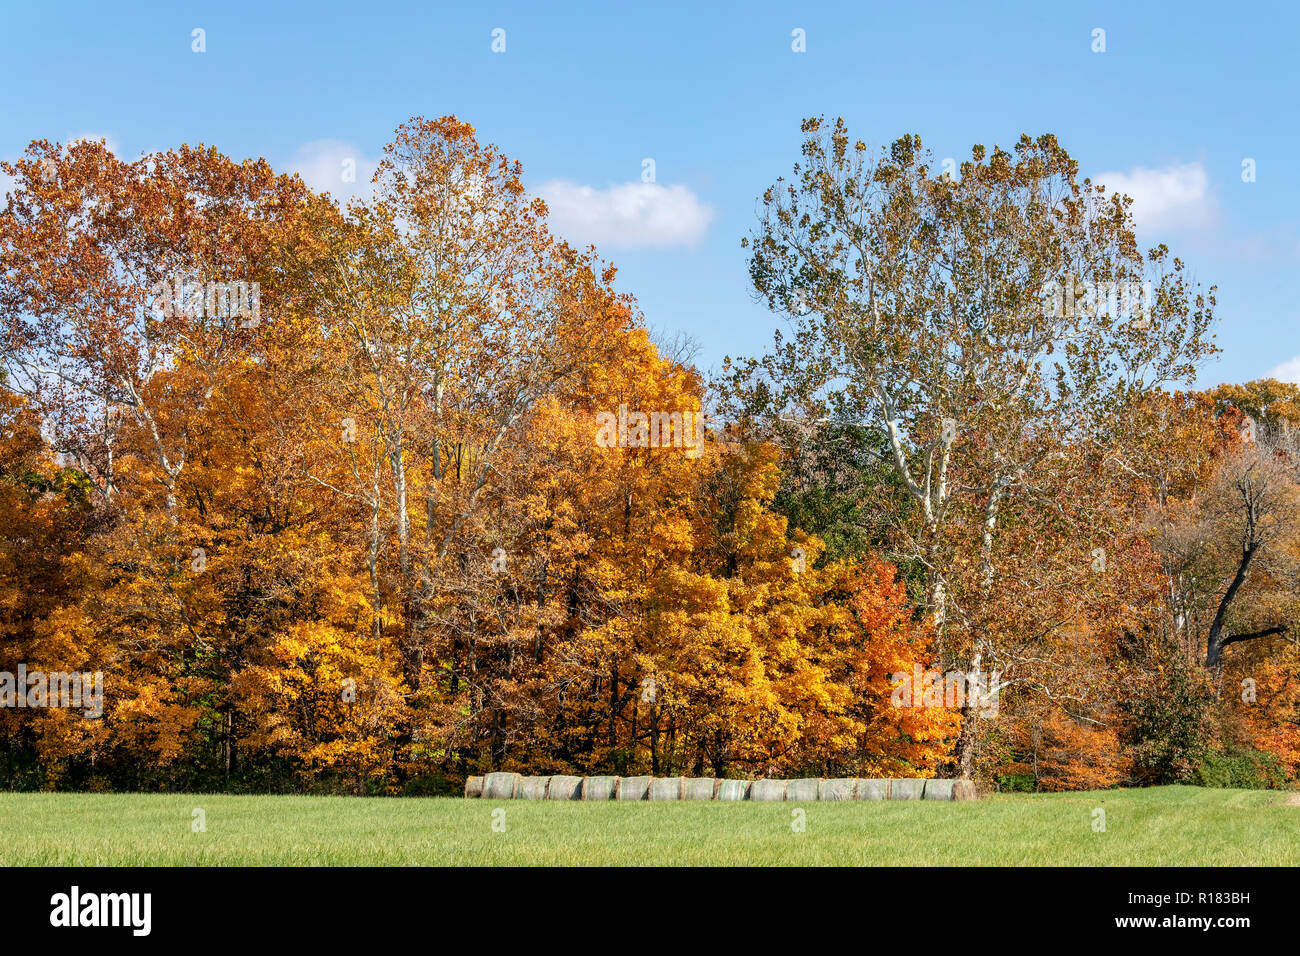 Rolls of hay on the edge of a field are topped with colorful tall trees displaying beautiful fall foliage. Stock Photo